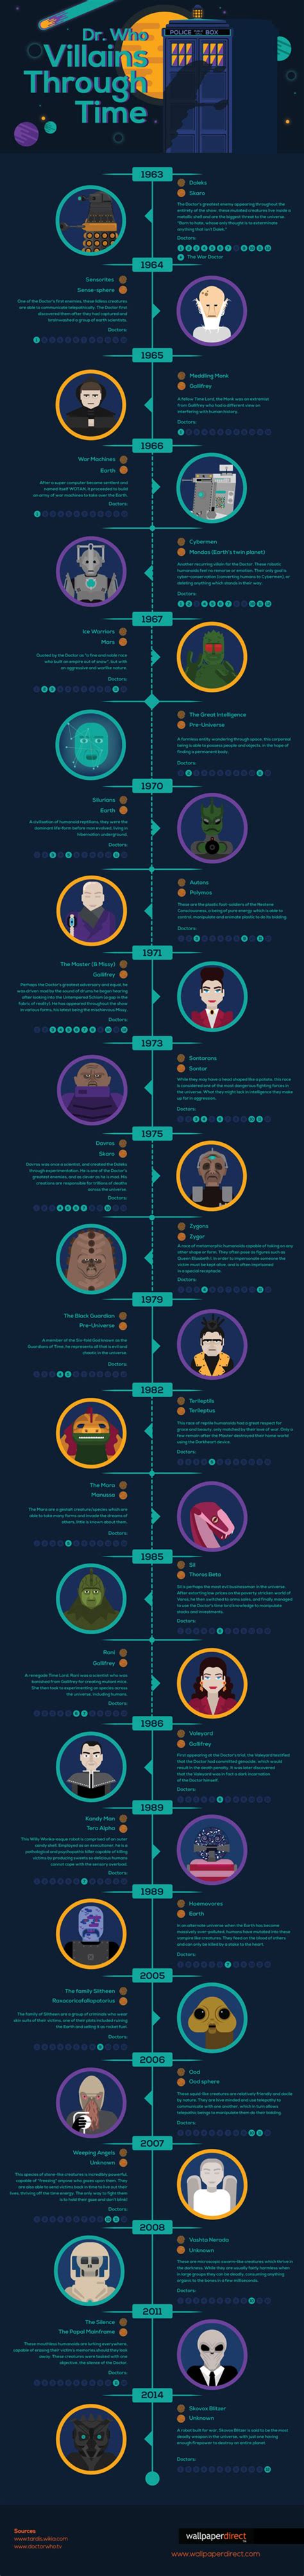 Doctor Who Infographic Provides A Timeline Of The Shows Villains